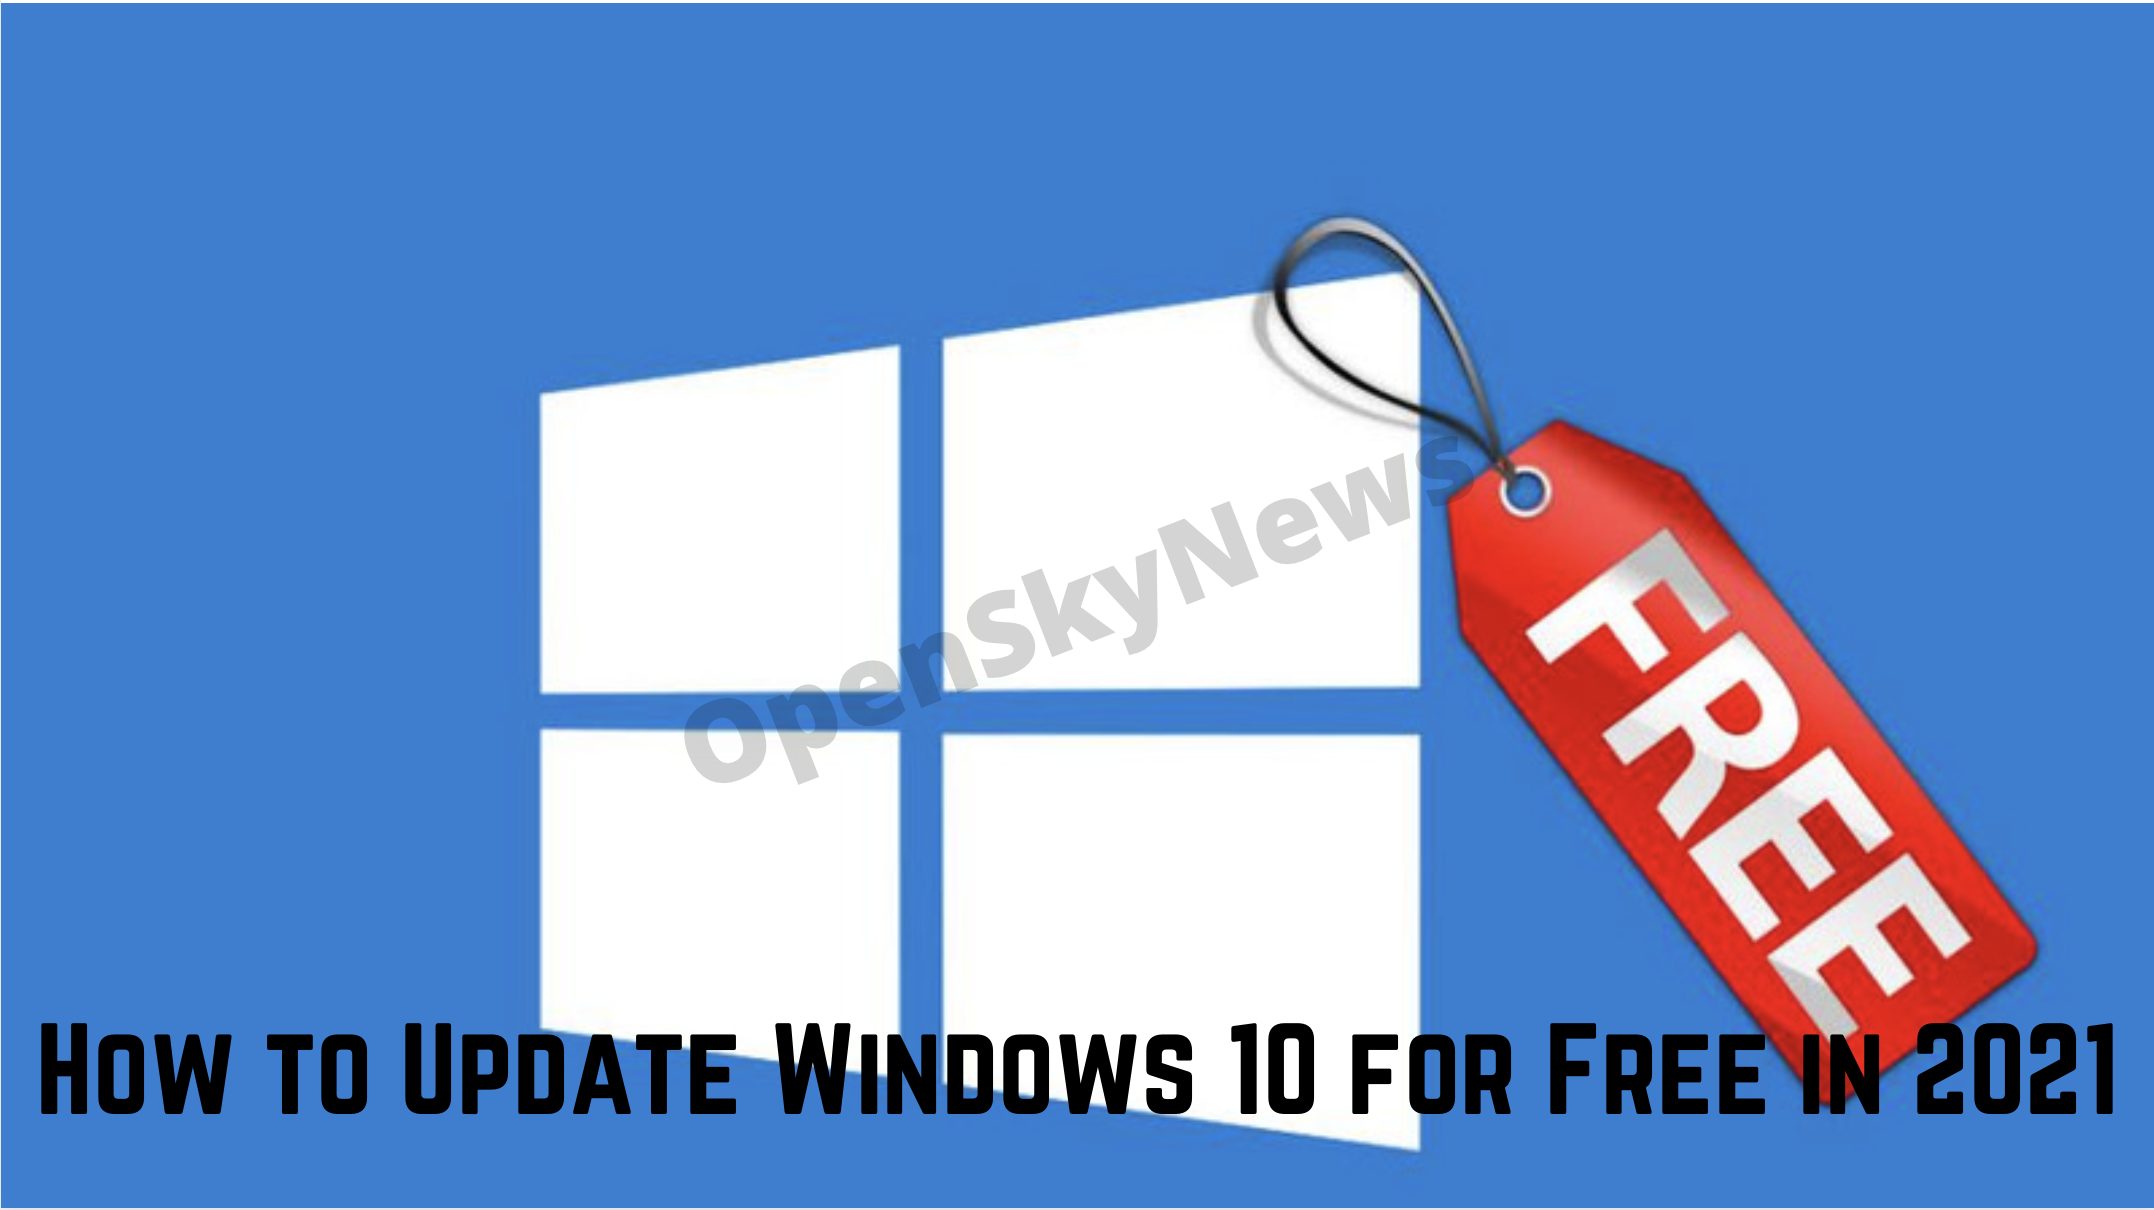 How to Update Windows 10 for Free in 2021